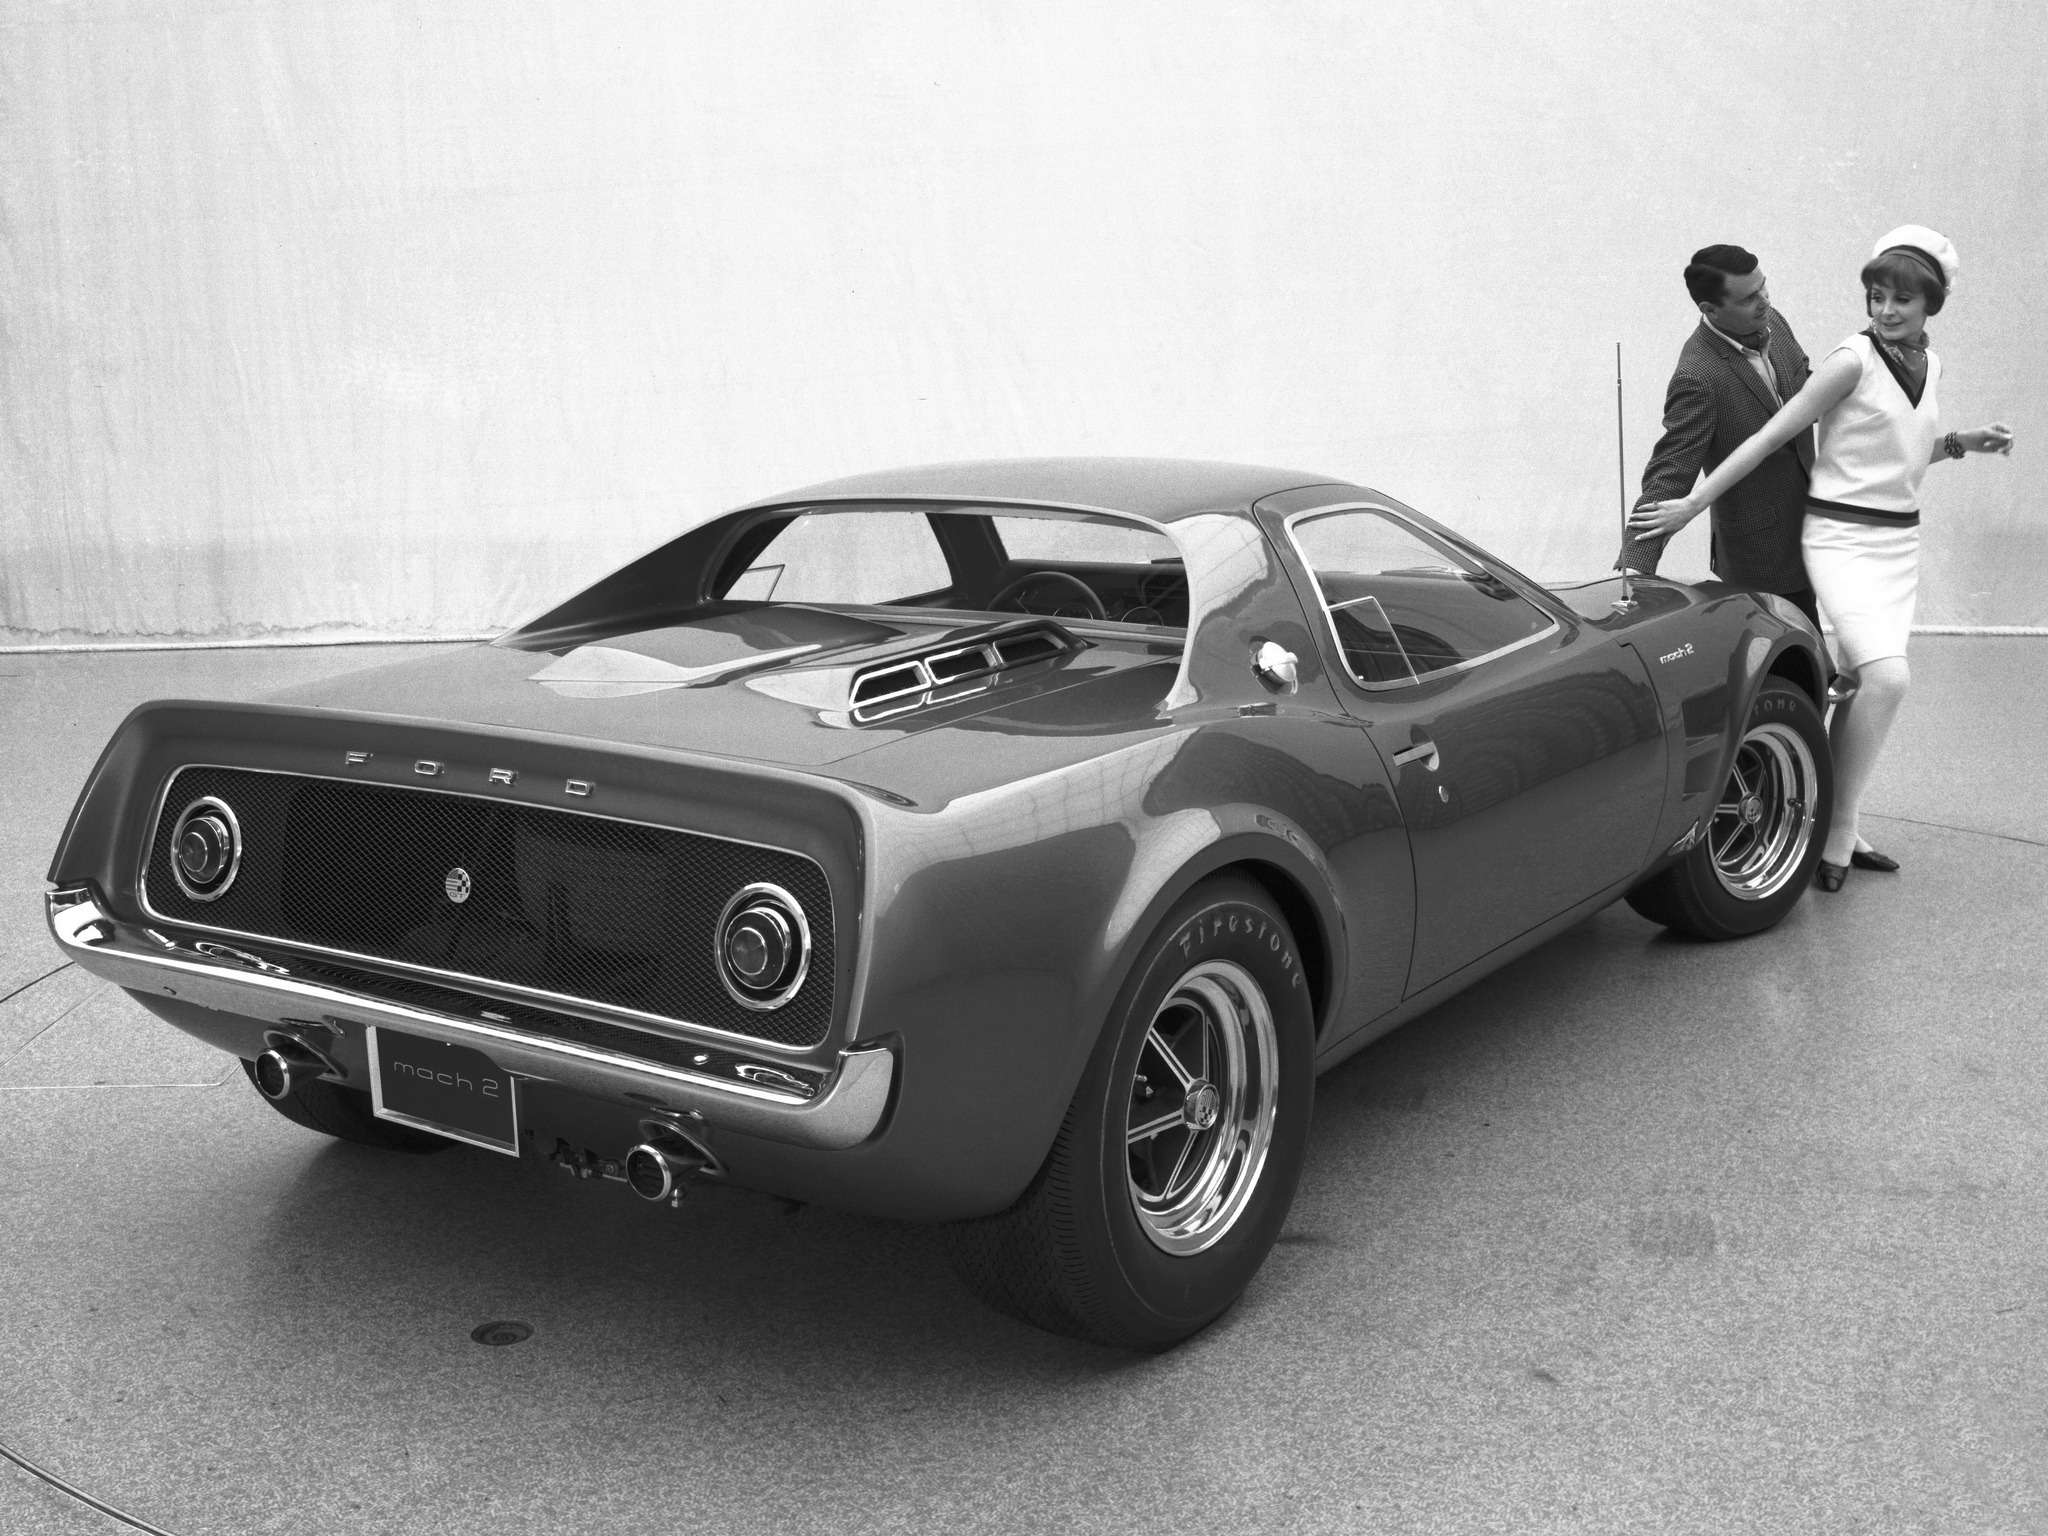 Mustang Mach 2 Concept Car (1967) - Old Concept Cars